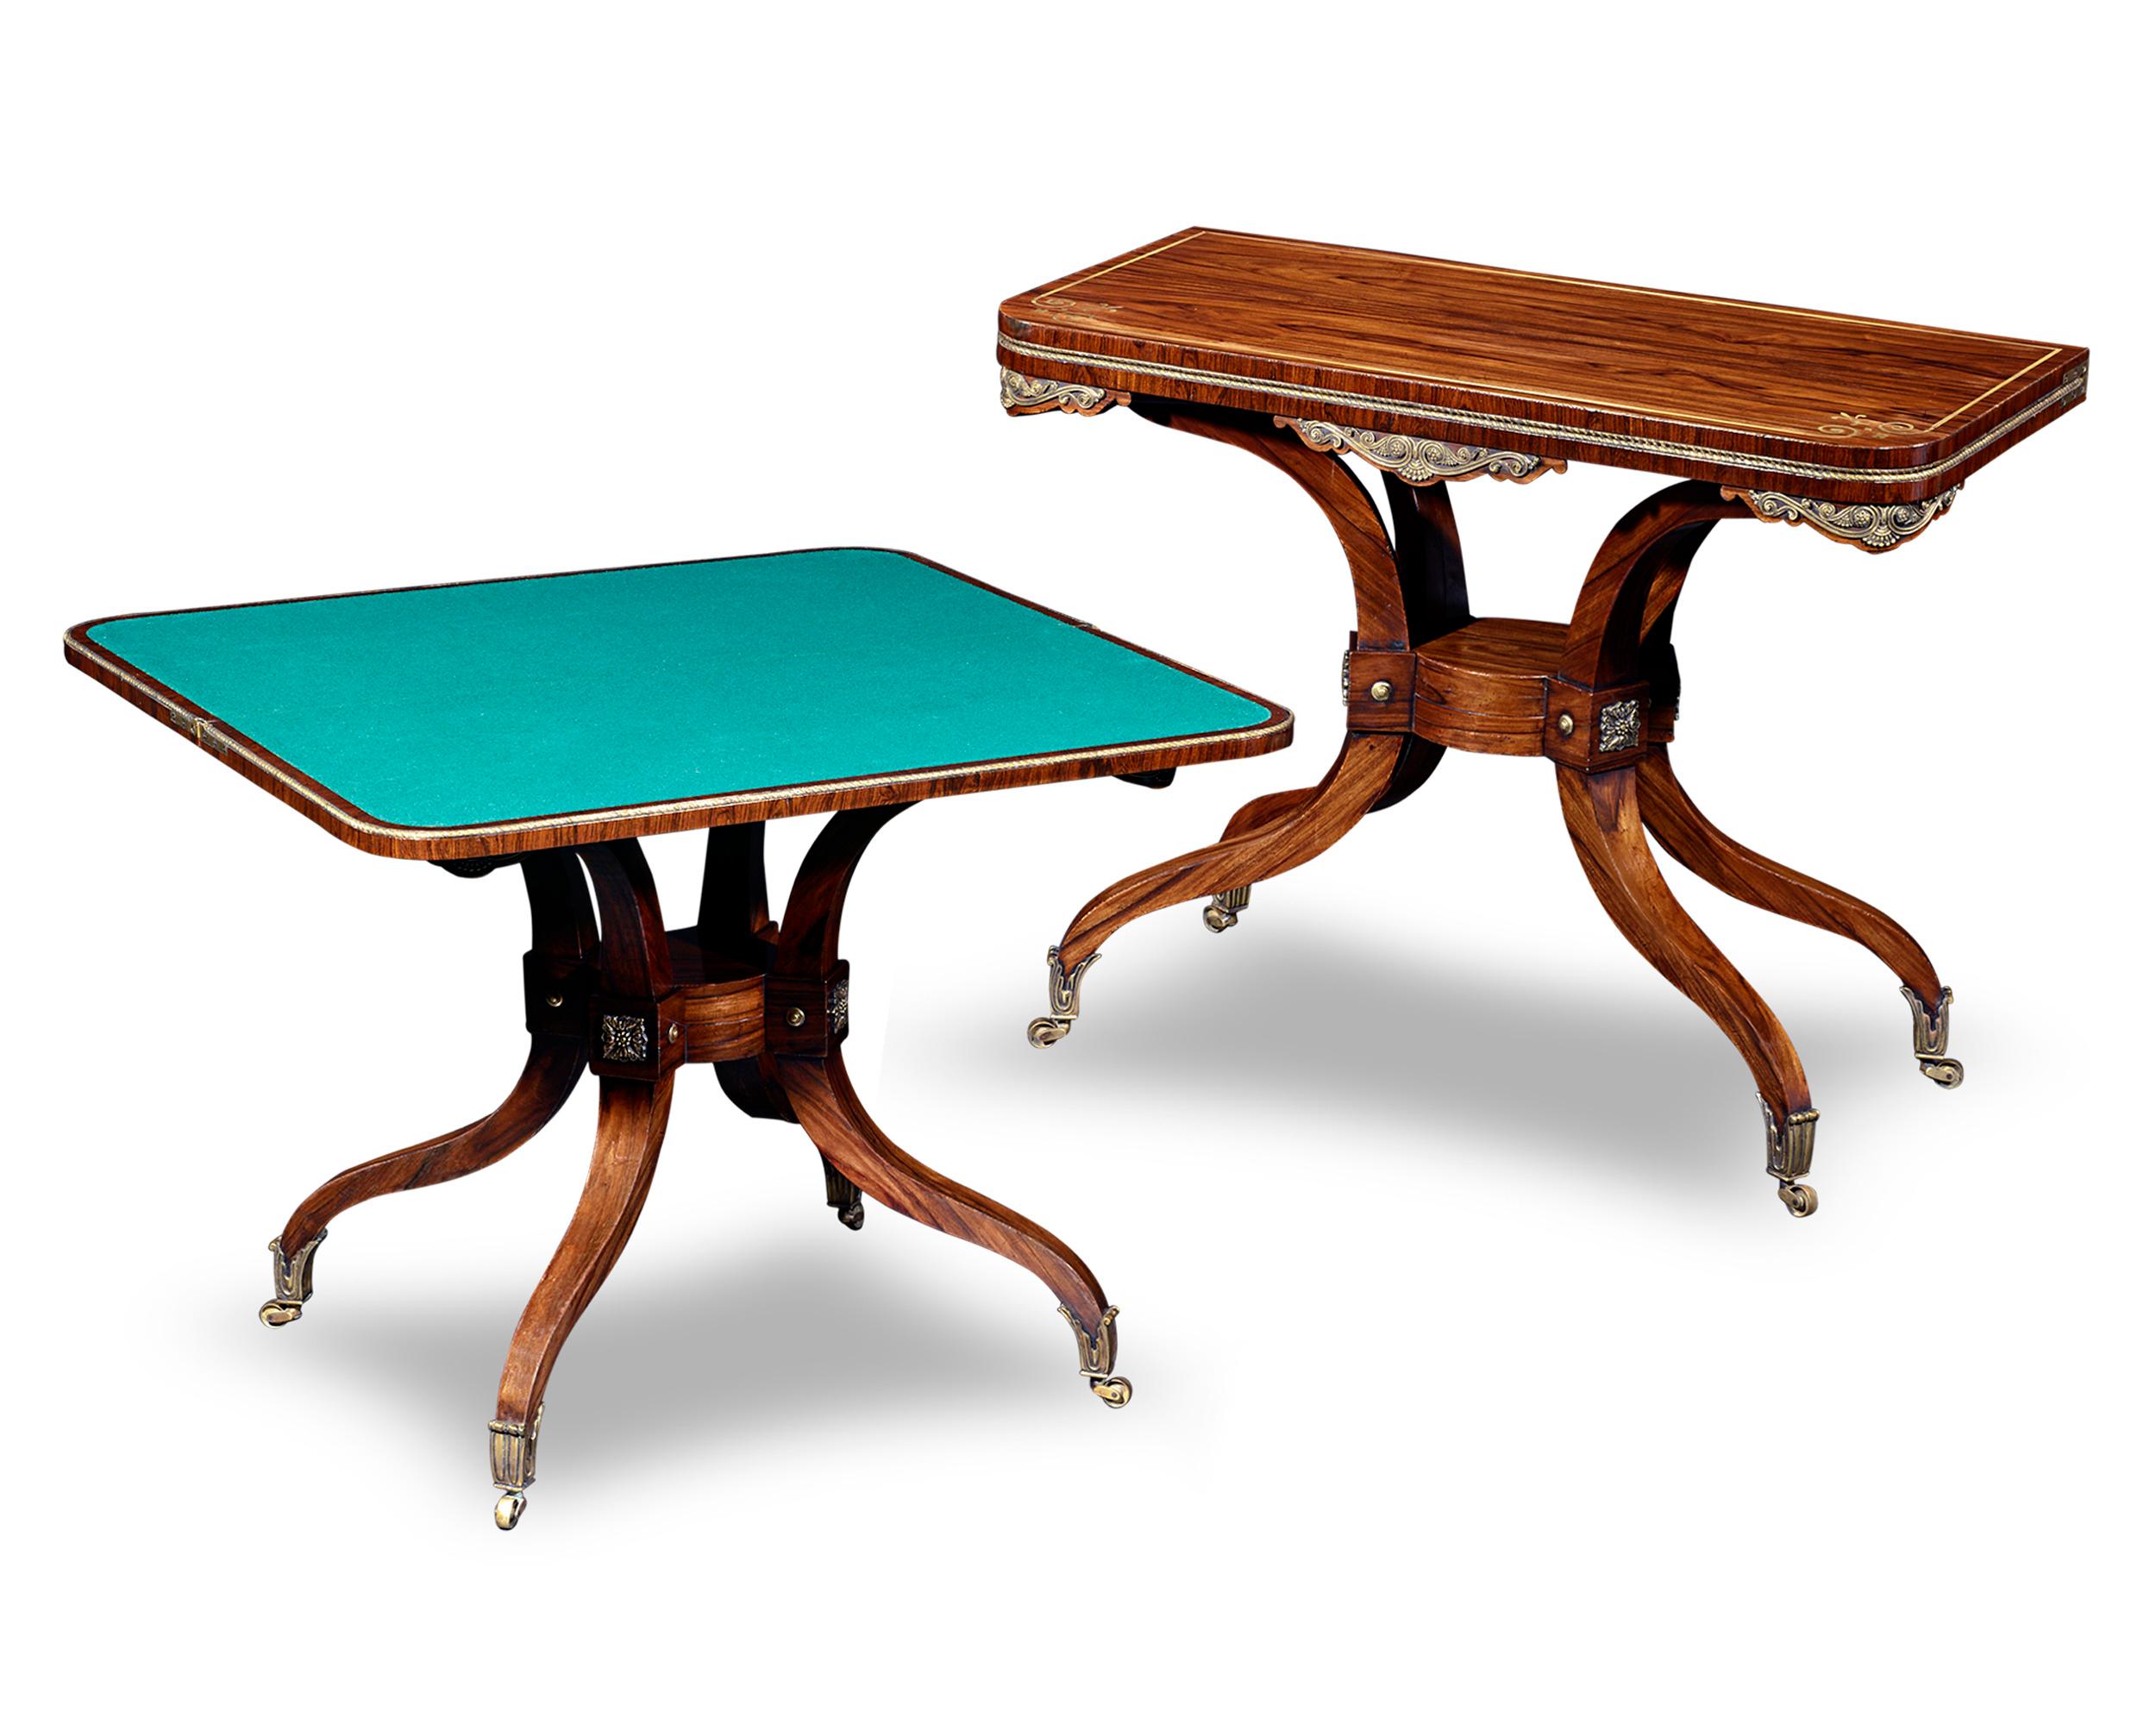 These exceptional Regency card tables were designed with dual purposes in mind. Crafted of rosewood, the tables serve as attractive console tables when closed. When opened, the tables quickly transform into a felt-lined card playing surface.